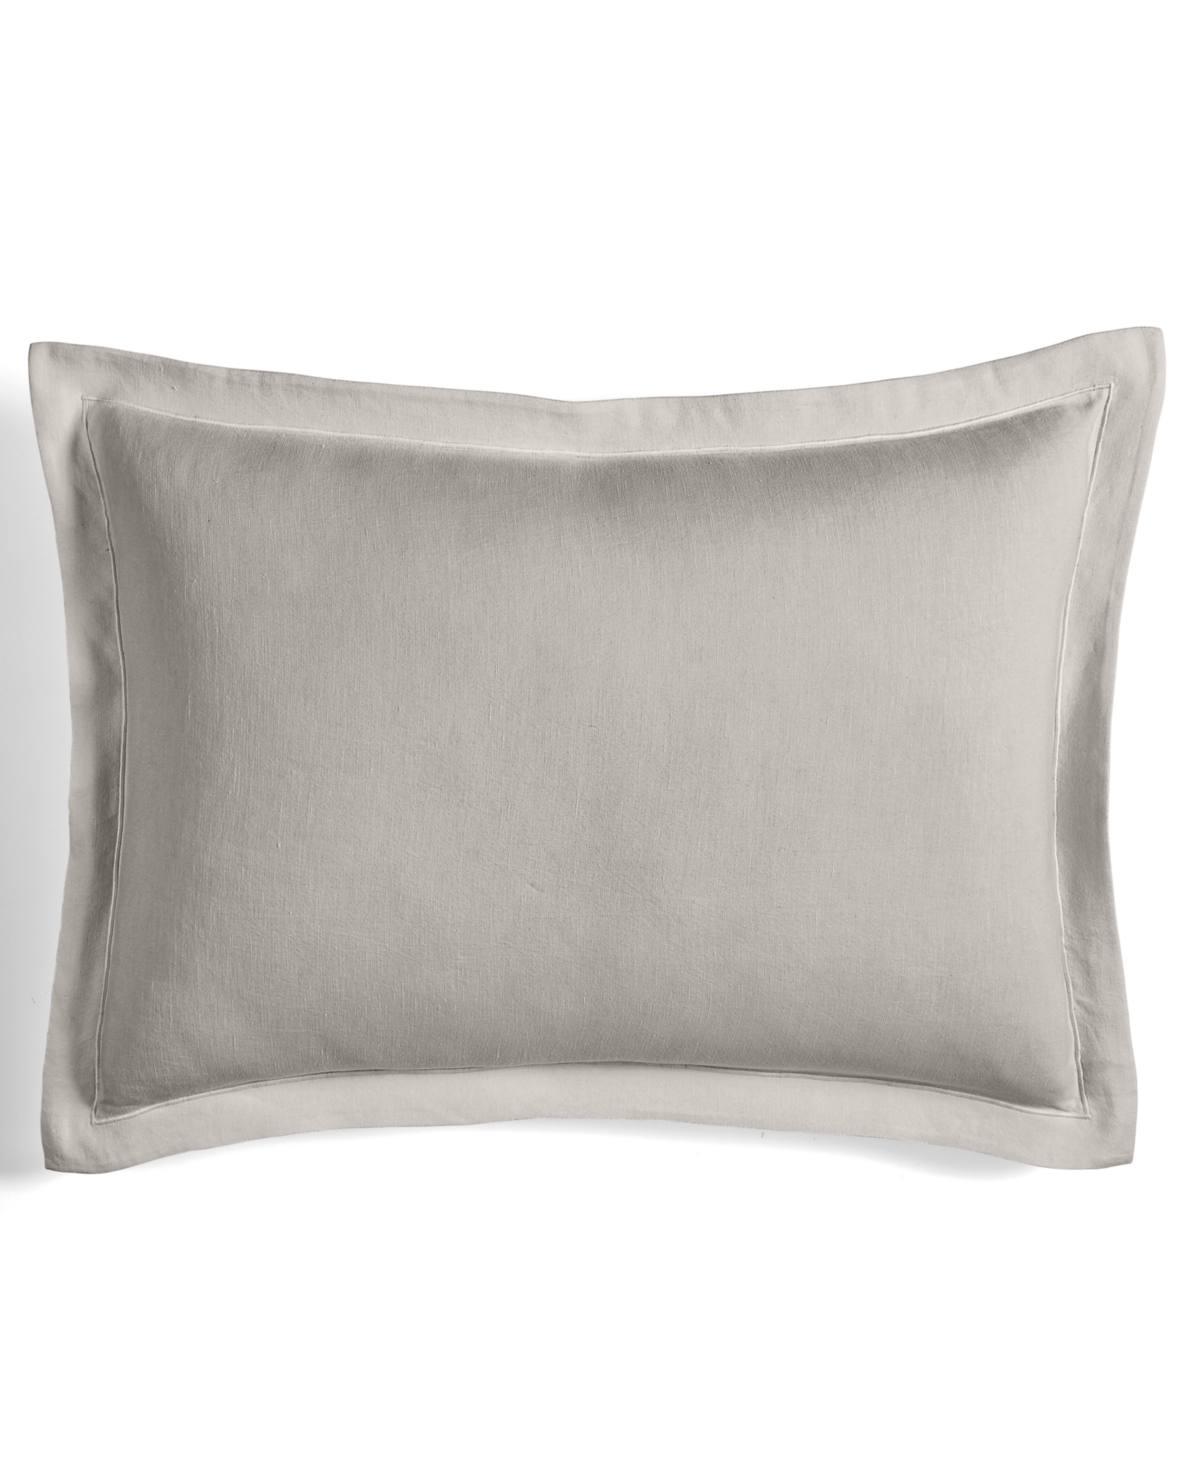 Closeout! Hotel Collection Linen/Modal Blend Sham, Standard, Created for Macy's - Grey